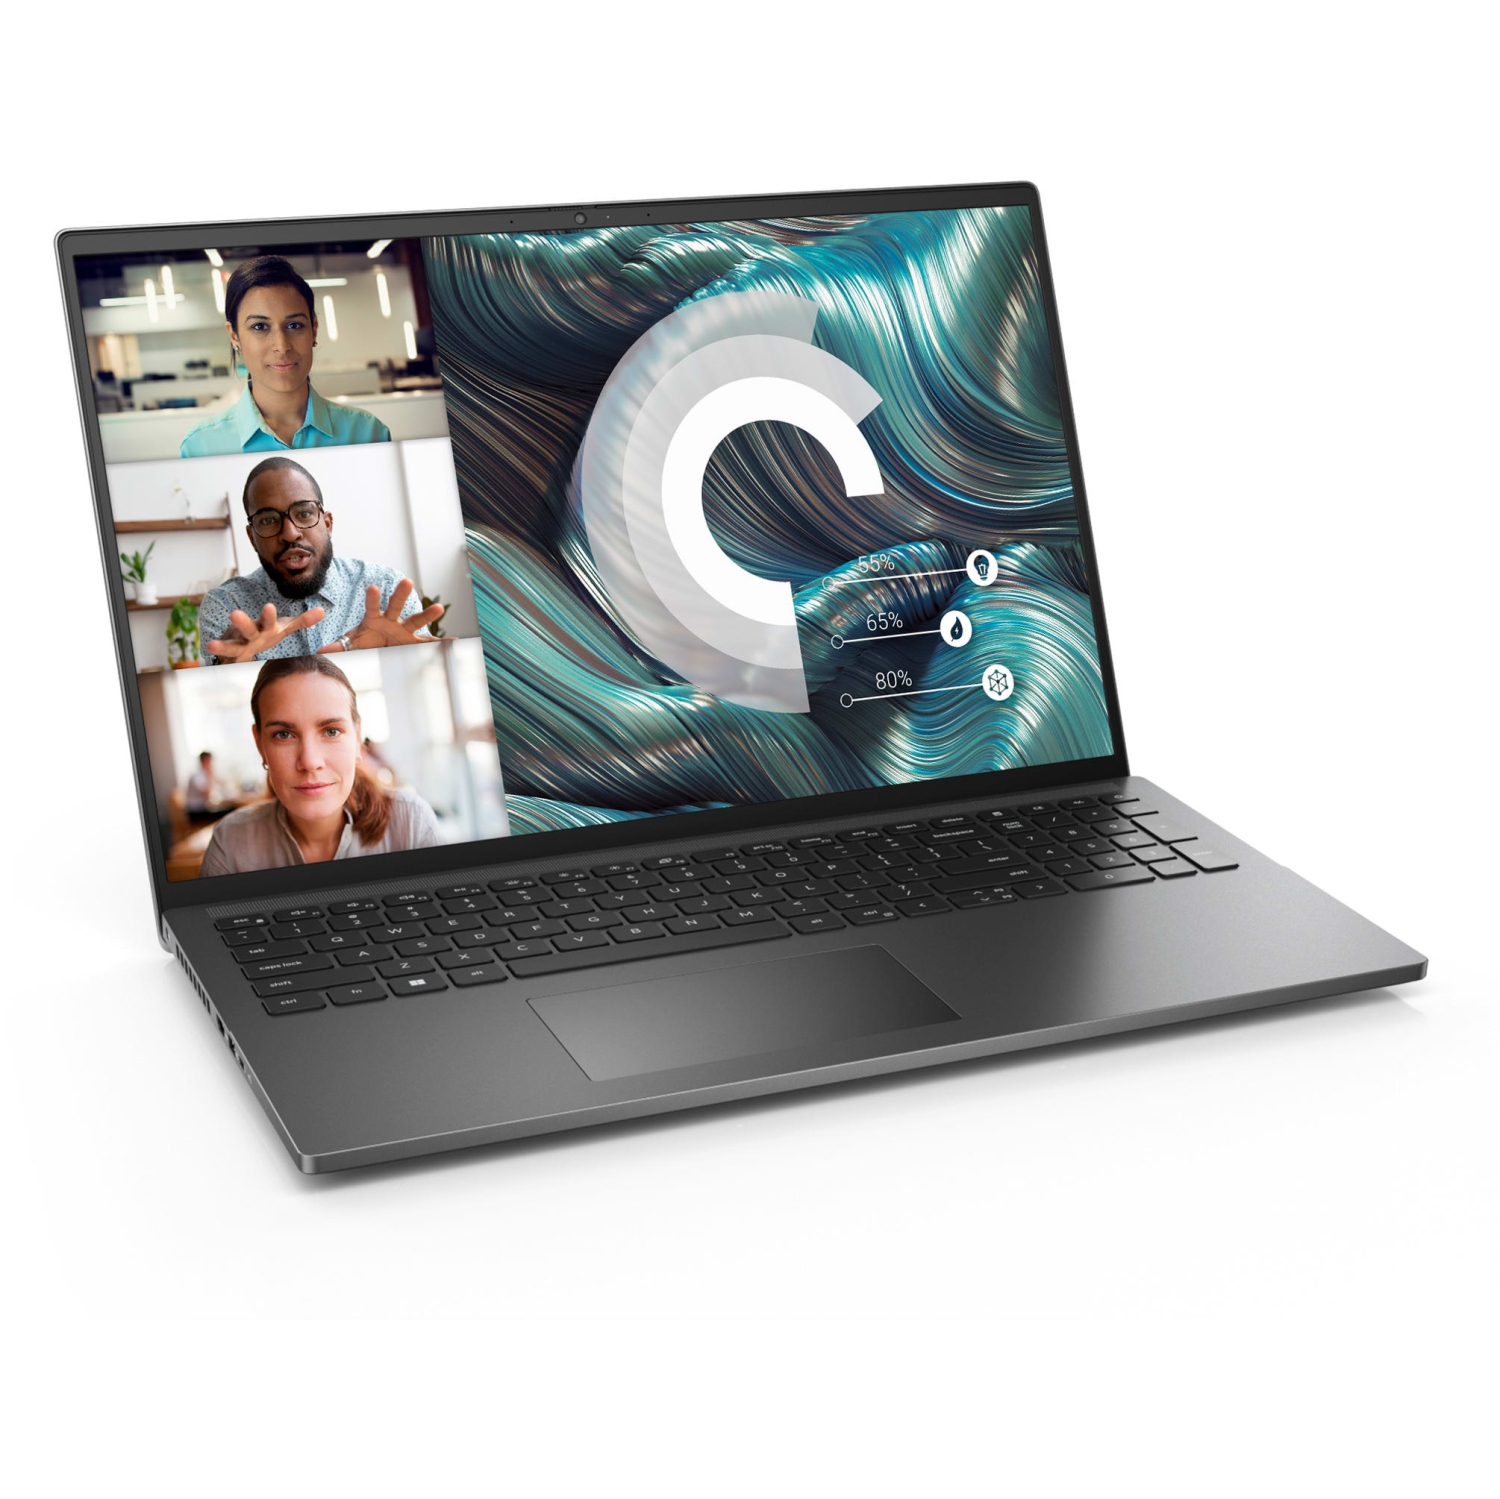 Refurbished (Excellent) – Dell Vostro 7620 Laptop (2022) | 16" FHD+ | Core i7 - 2TB SSD - 40GB RAM - RTX 3050 | 14 Cores @ 4.7 GHz - 12th Gen CPU